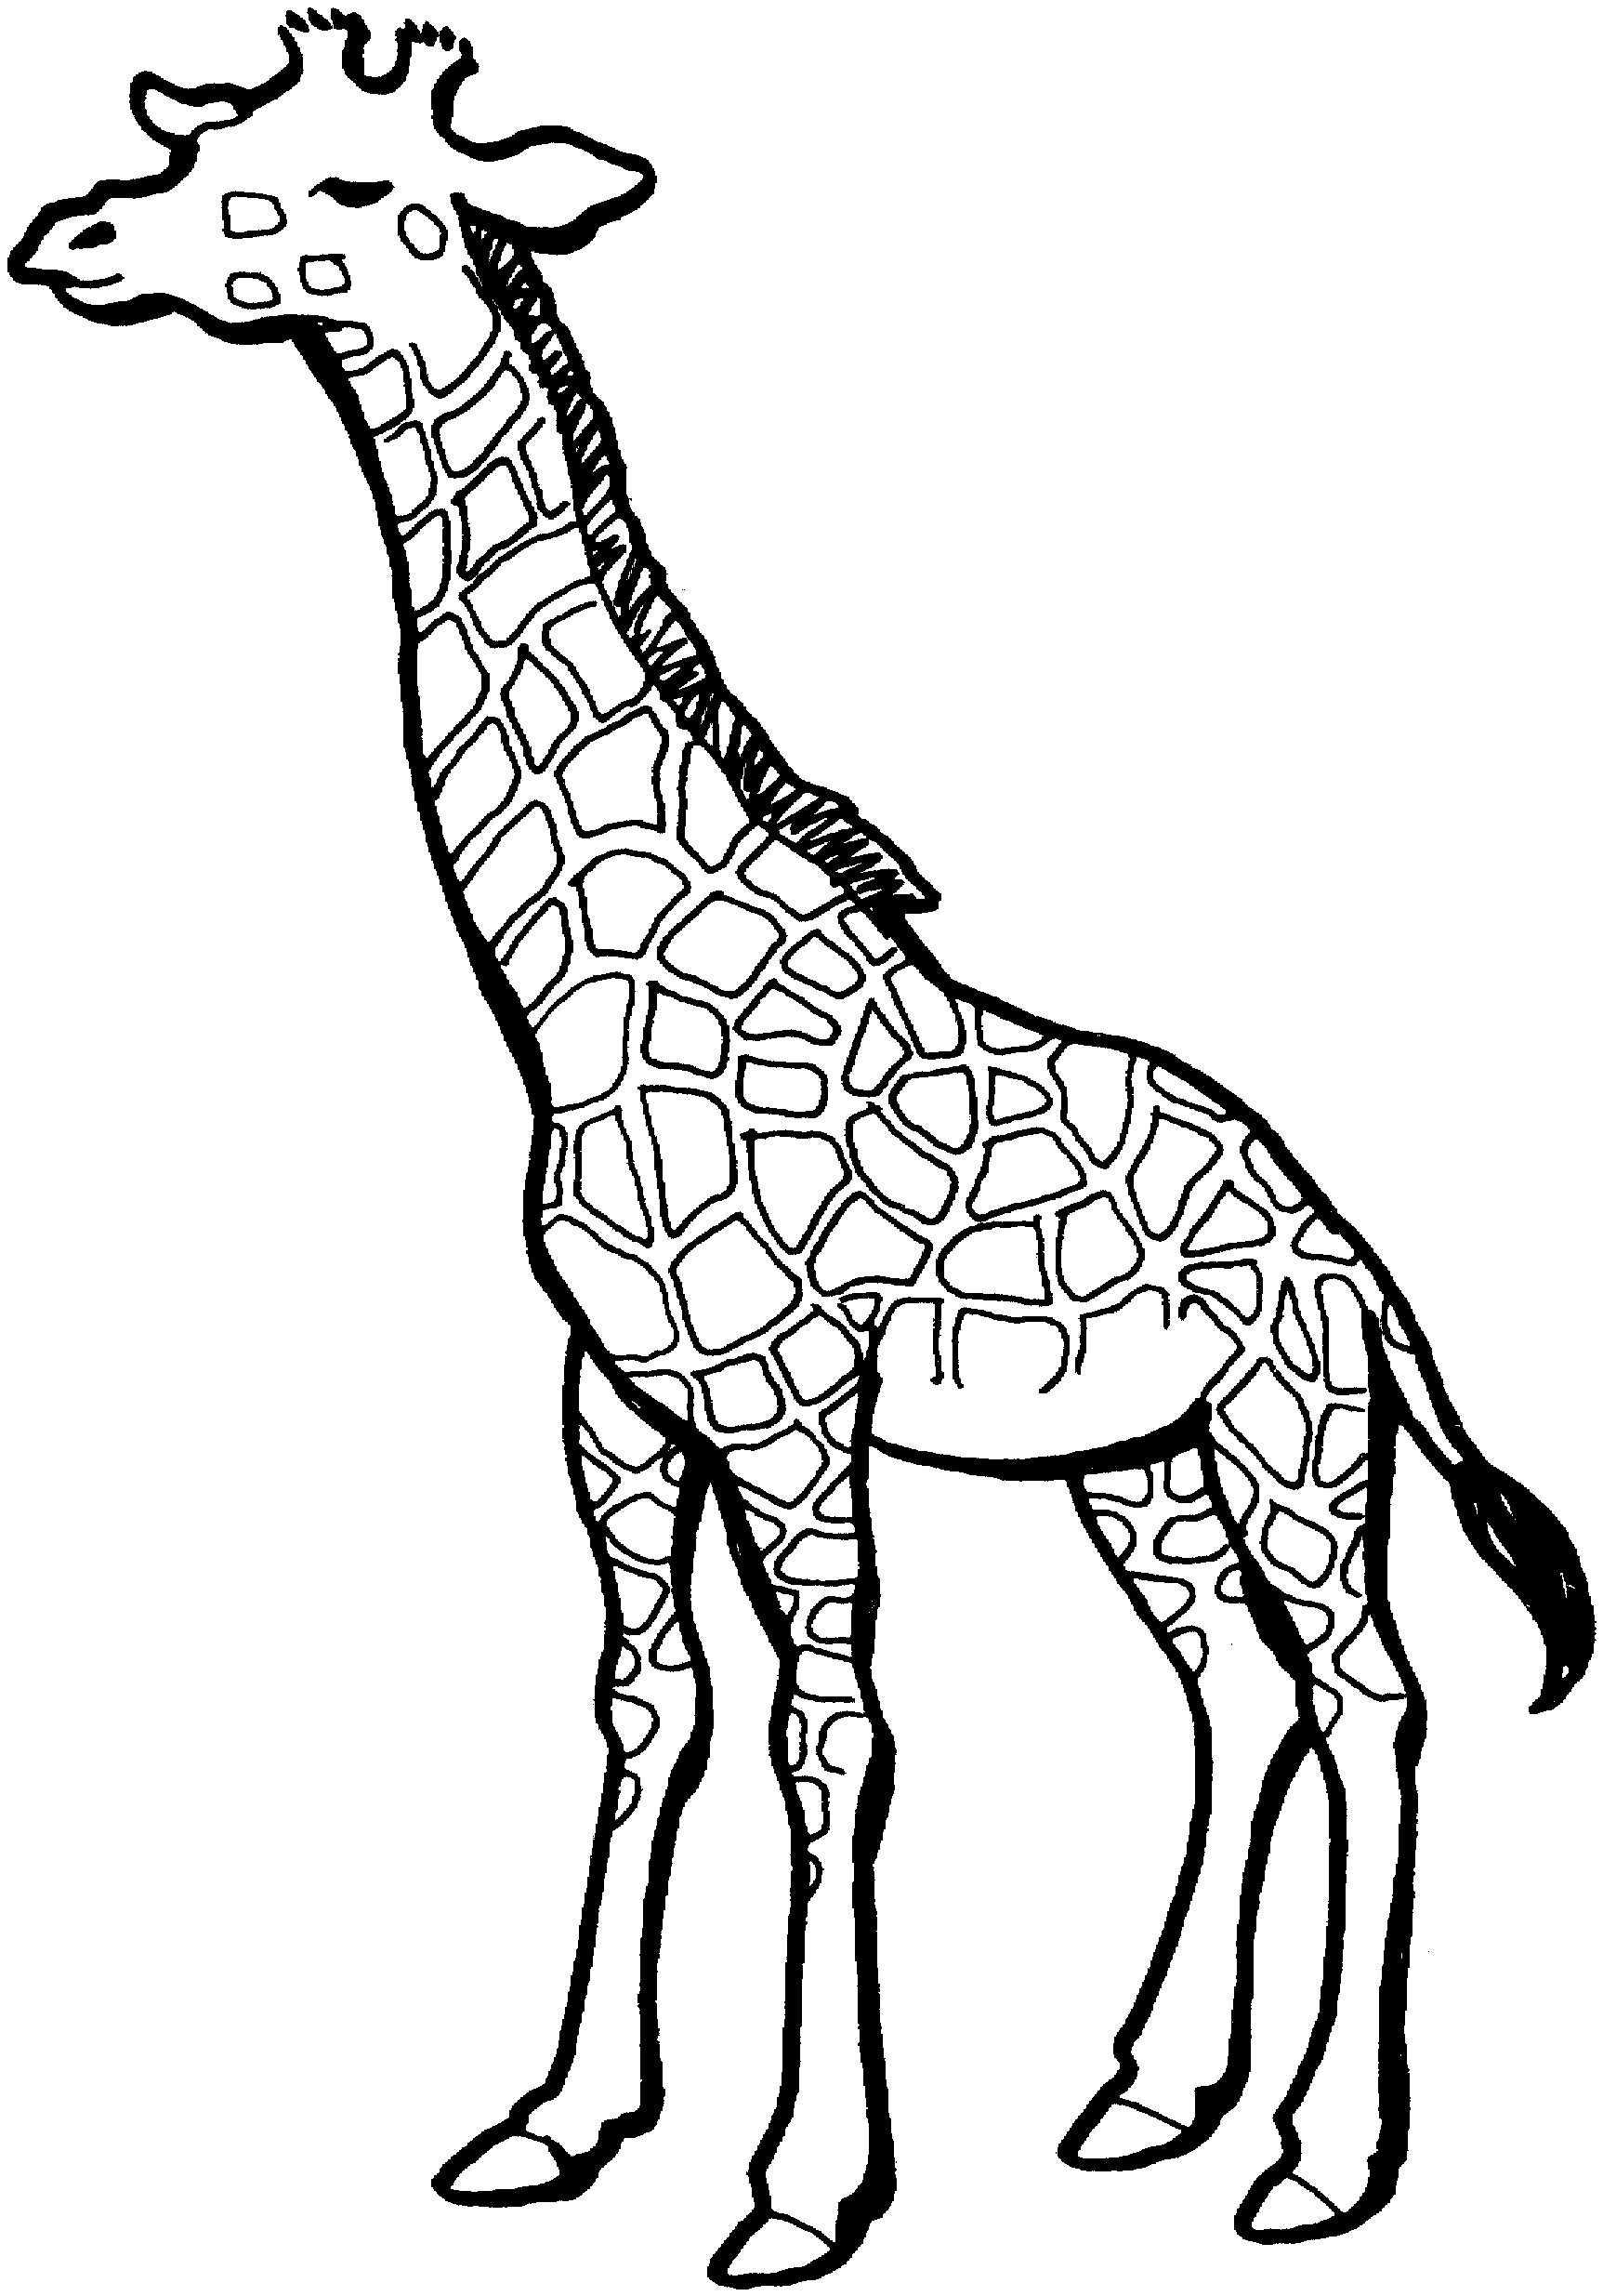 Giraffe Black And Whiote Drawing For Children Printable - ClipArt Best